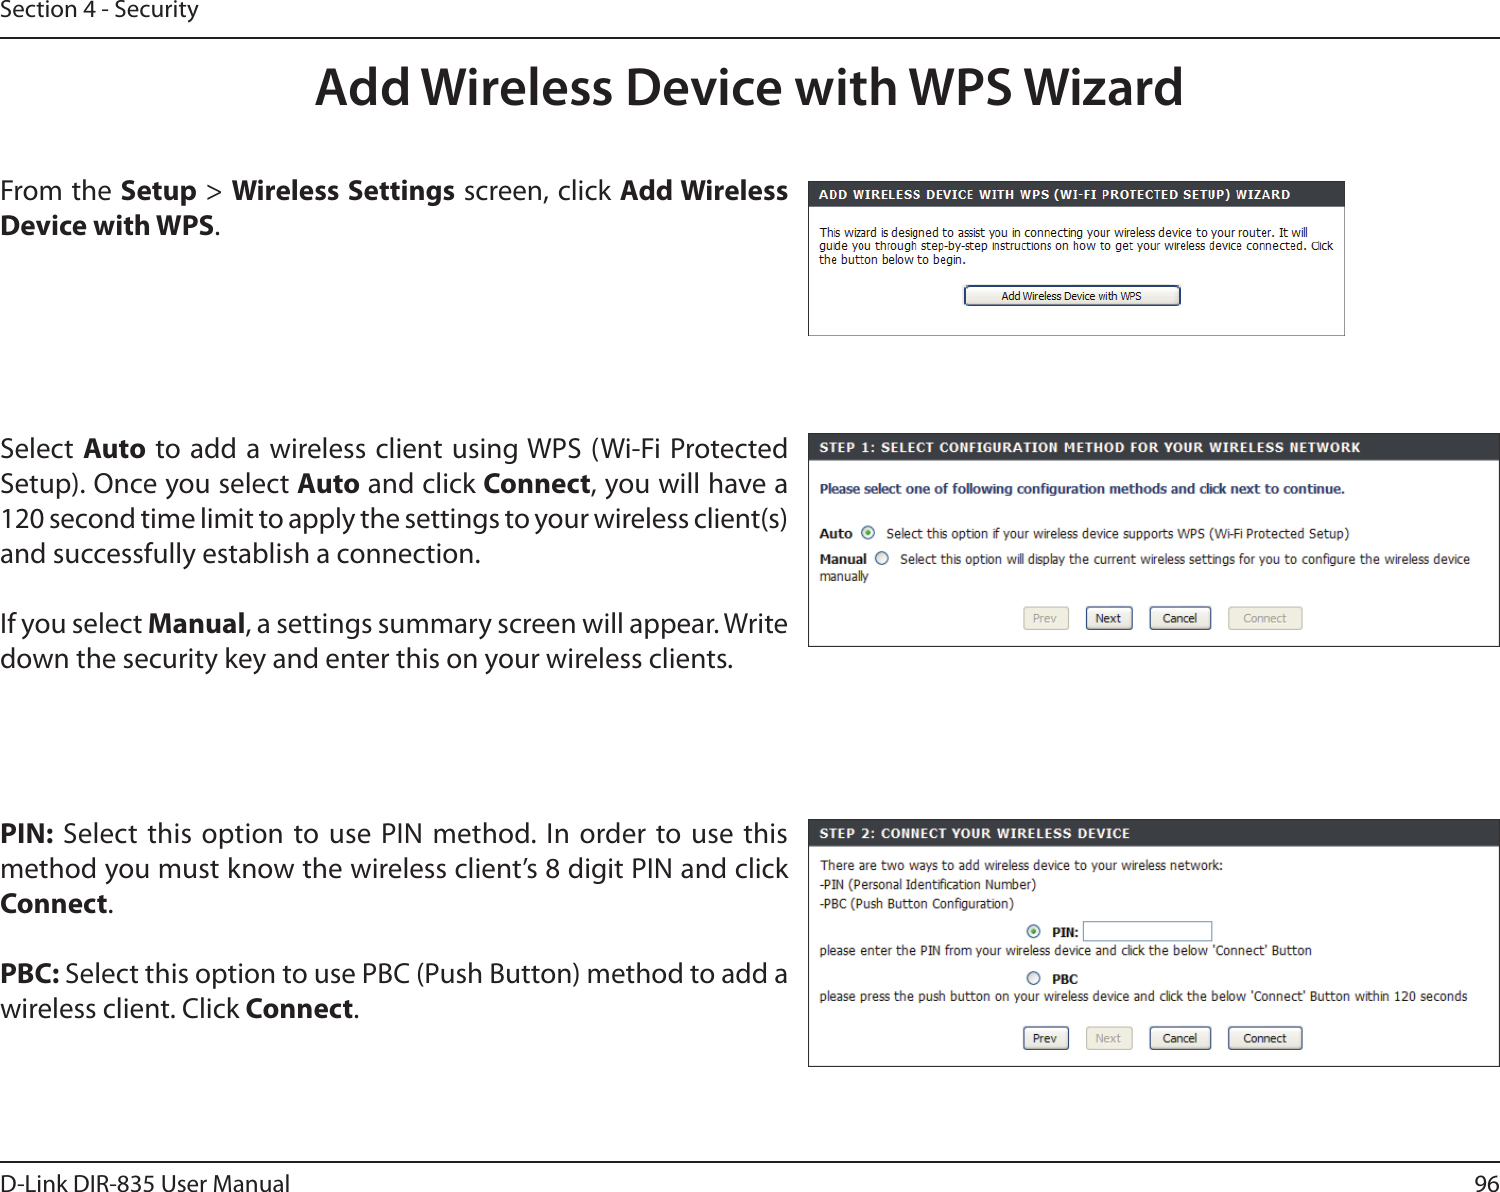 96D-Link DIR-835 User ManualSection 4 - SecurityFrom the Setup &gt; Wireless Settings screen, click Add Wireless Device with WPS.Add Wireless Device with WPS WizardPIN: Select this option  to use PIN method. In order to use this method you must know the wireless client’s 8 digit PIN and click Connect.PBC: Select this option to use PBC (Push Button) method to add a wireless client. Click Connect.Select Auto to add a  wireless client using WPS (Wi-Fi  Protected Setup). Once you select Auto and click Connect, you will have a 120 second time limit to apply the settings to your wireless client(s) and successfully establish a connection. If you select Manual, a settings summary screen will appear. Write down the security key and enter this on your wireless clients. 